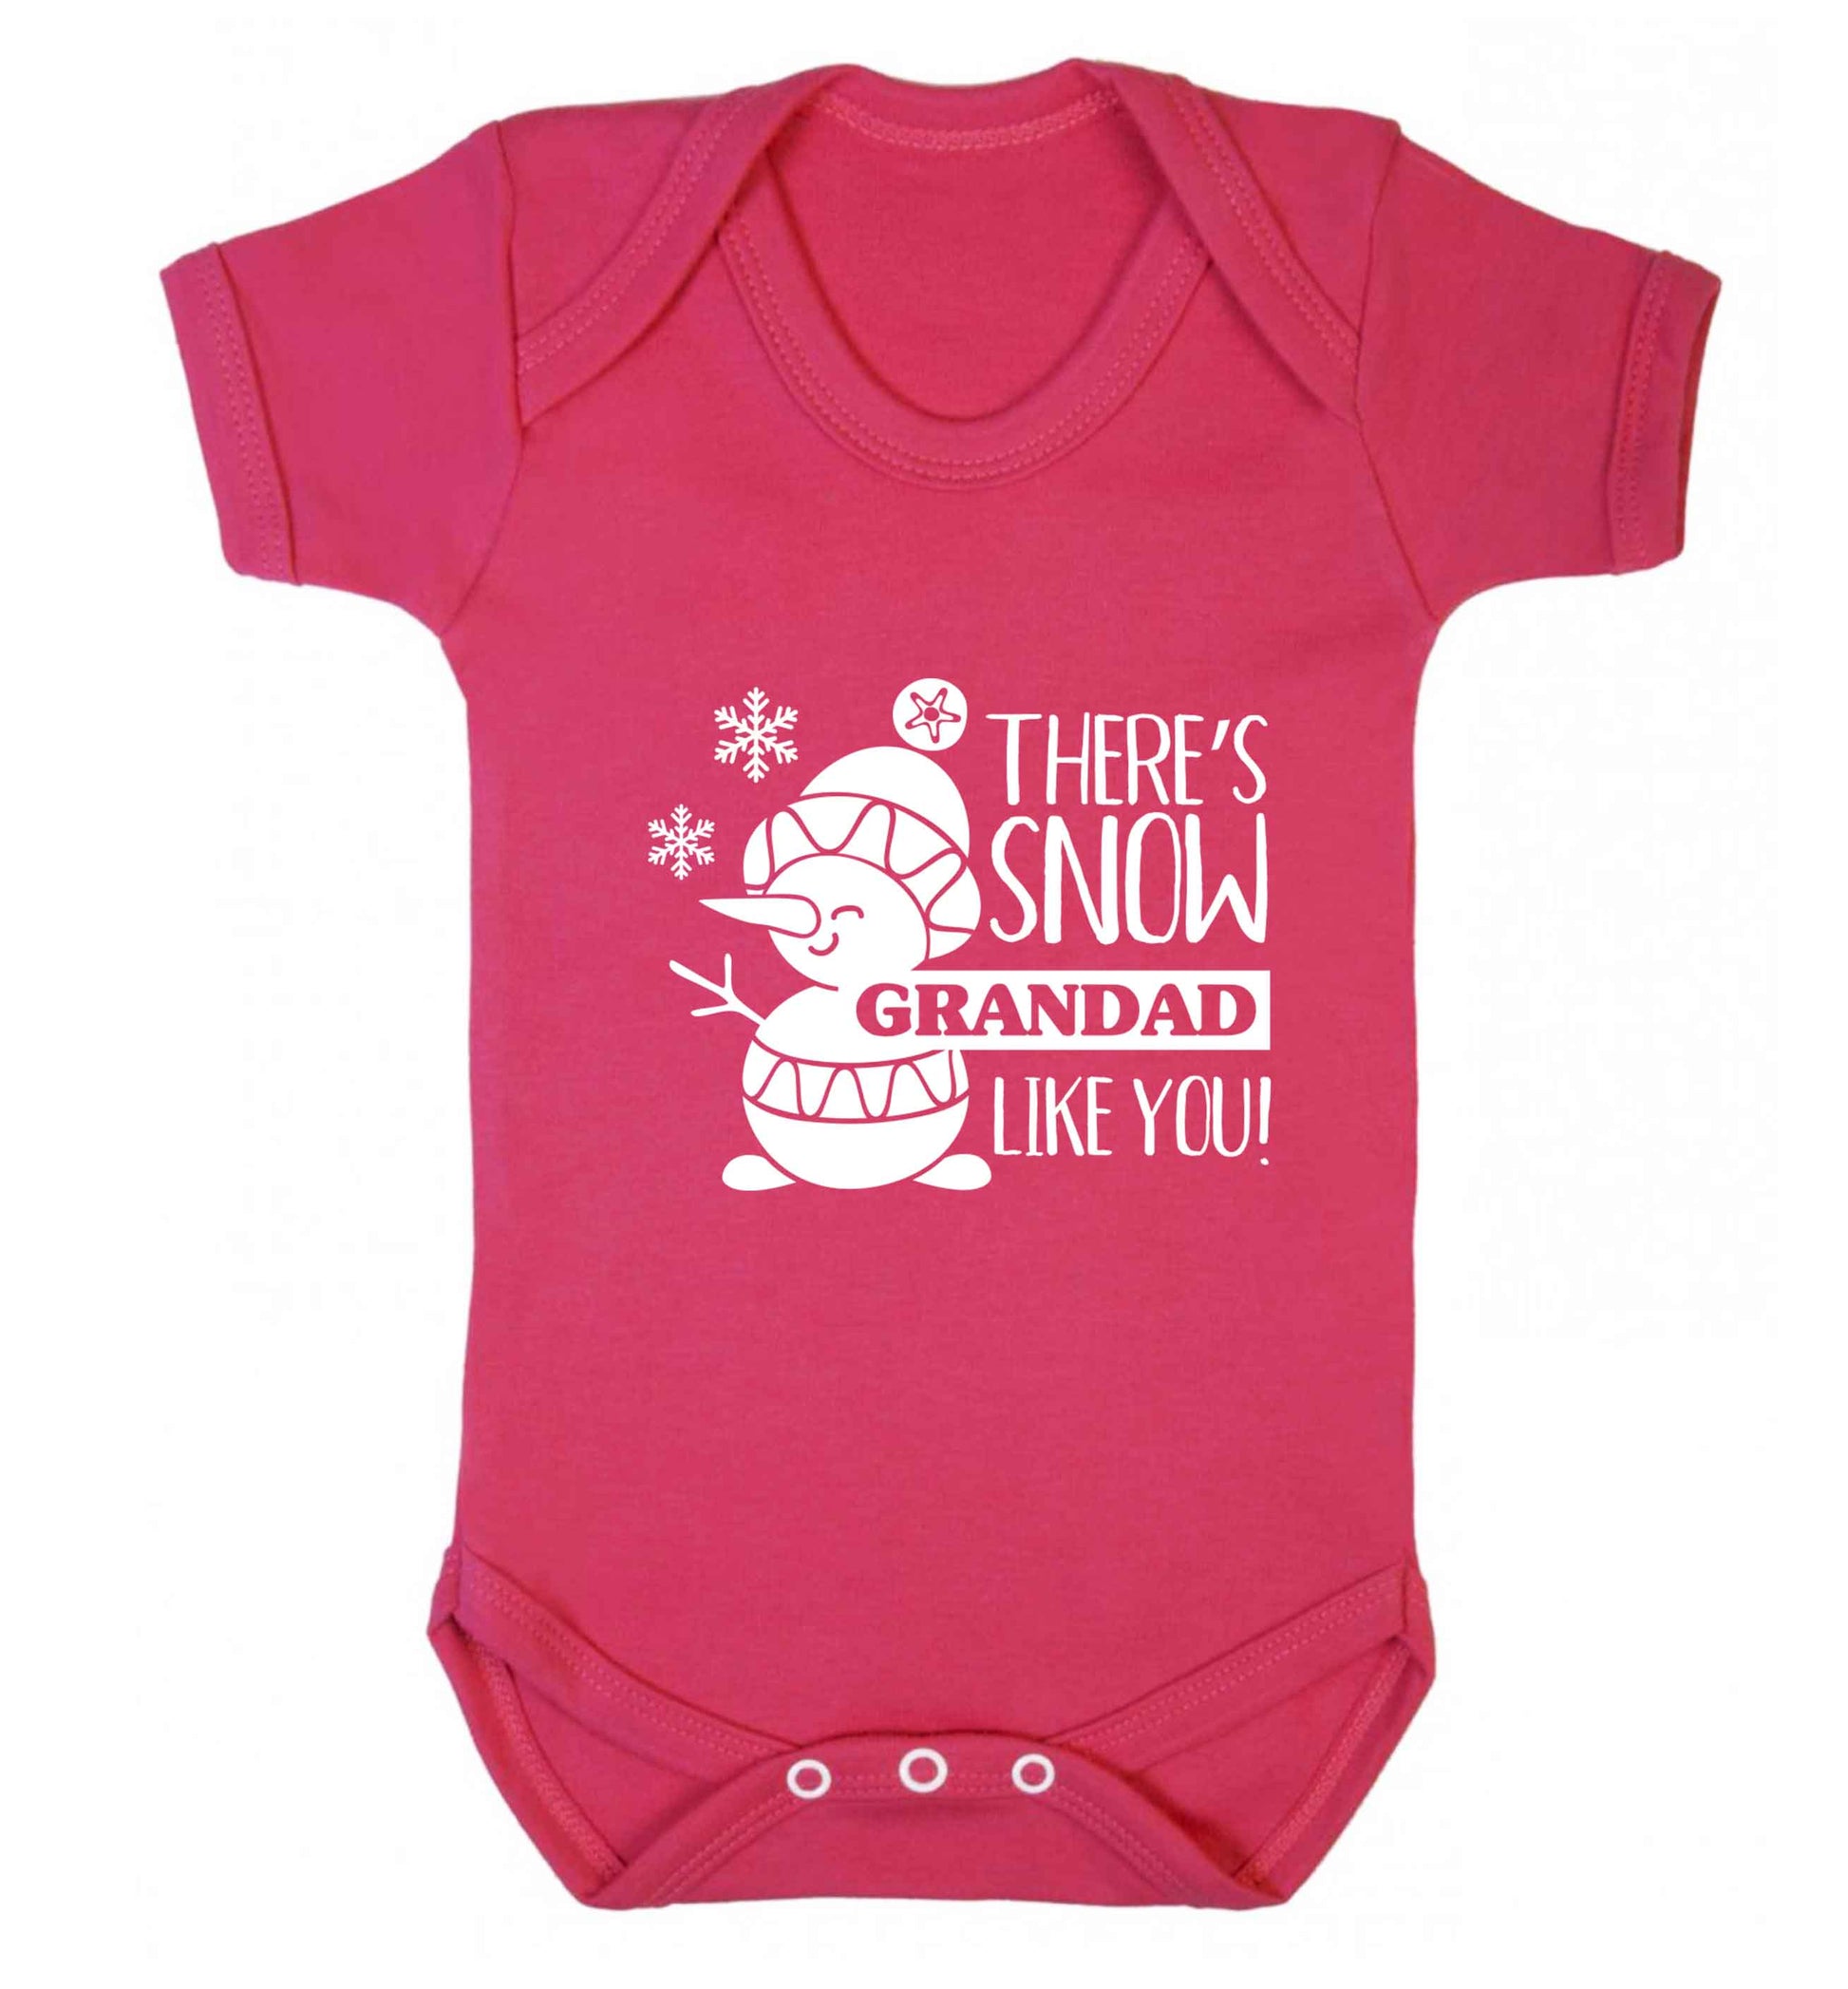 There's snow grandad like you baby vest dark pink 18-24 months